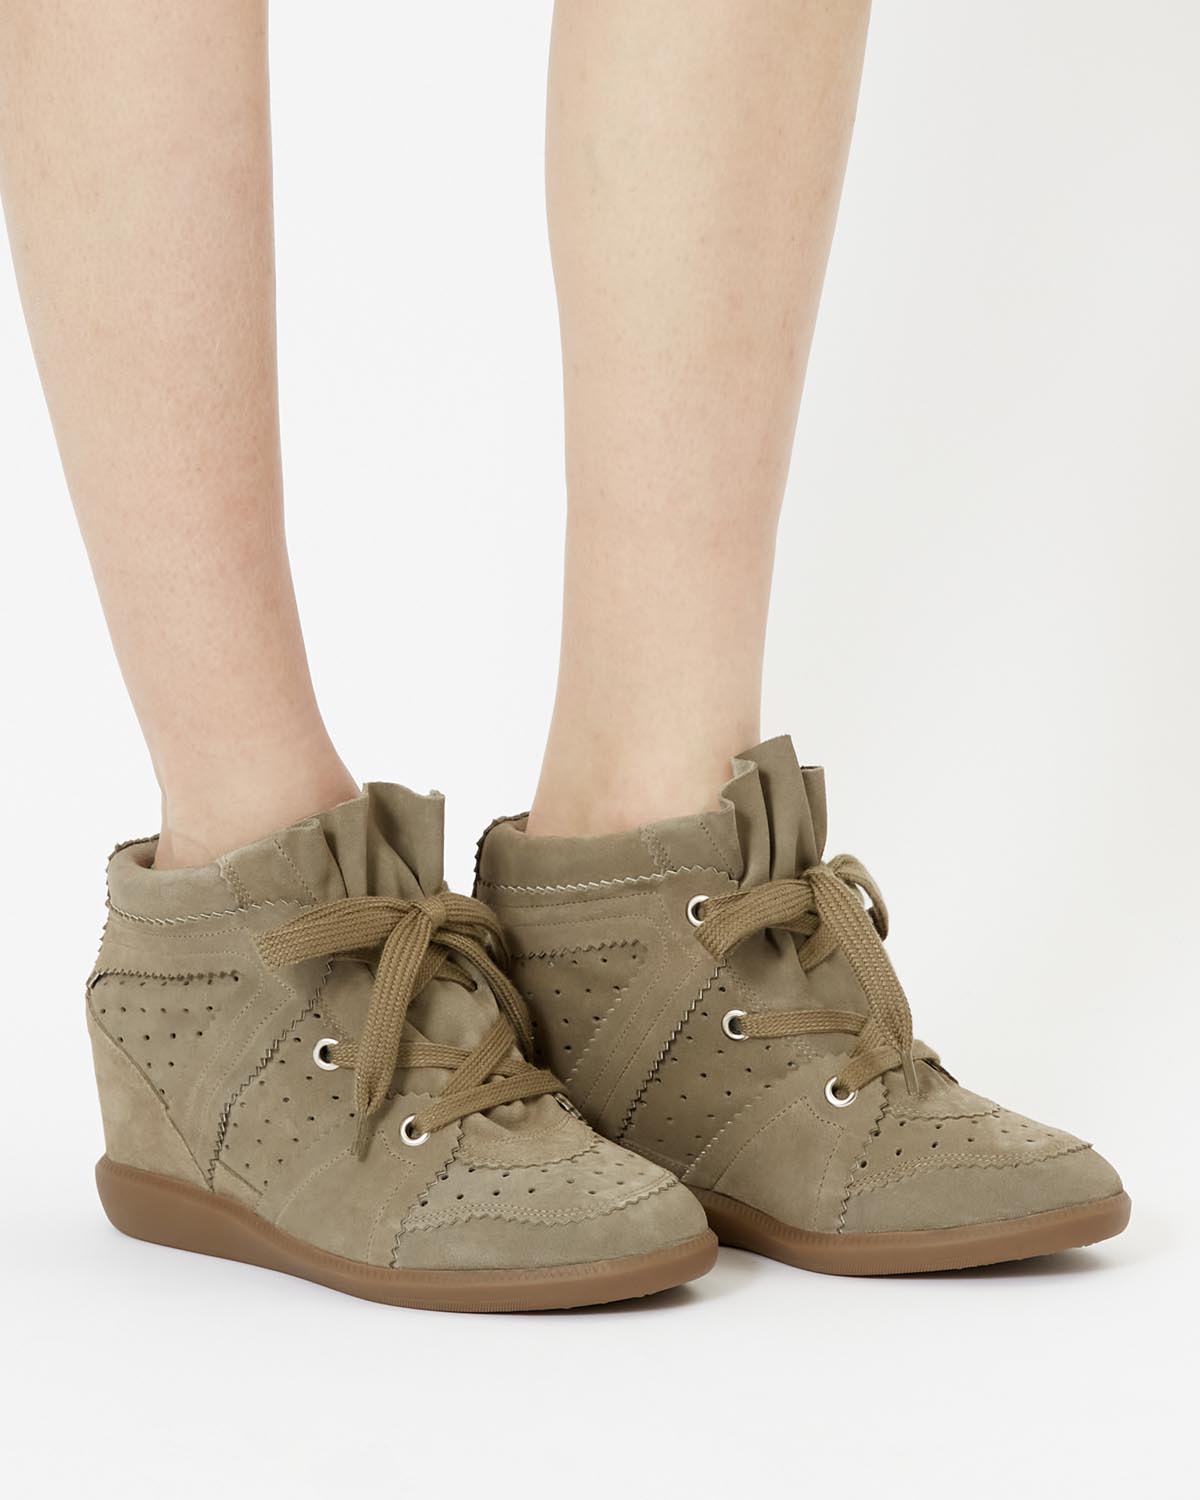 Bobby sneakers Woman Taupe 3